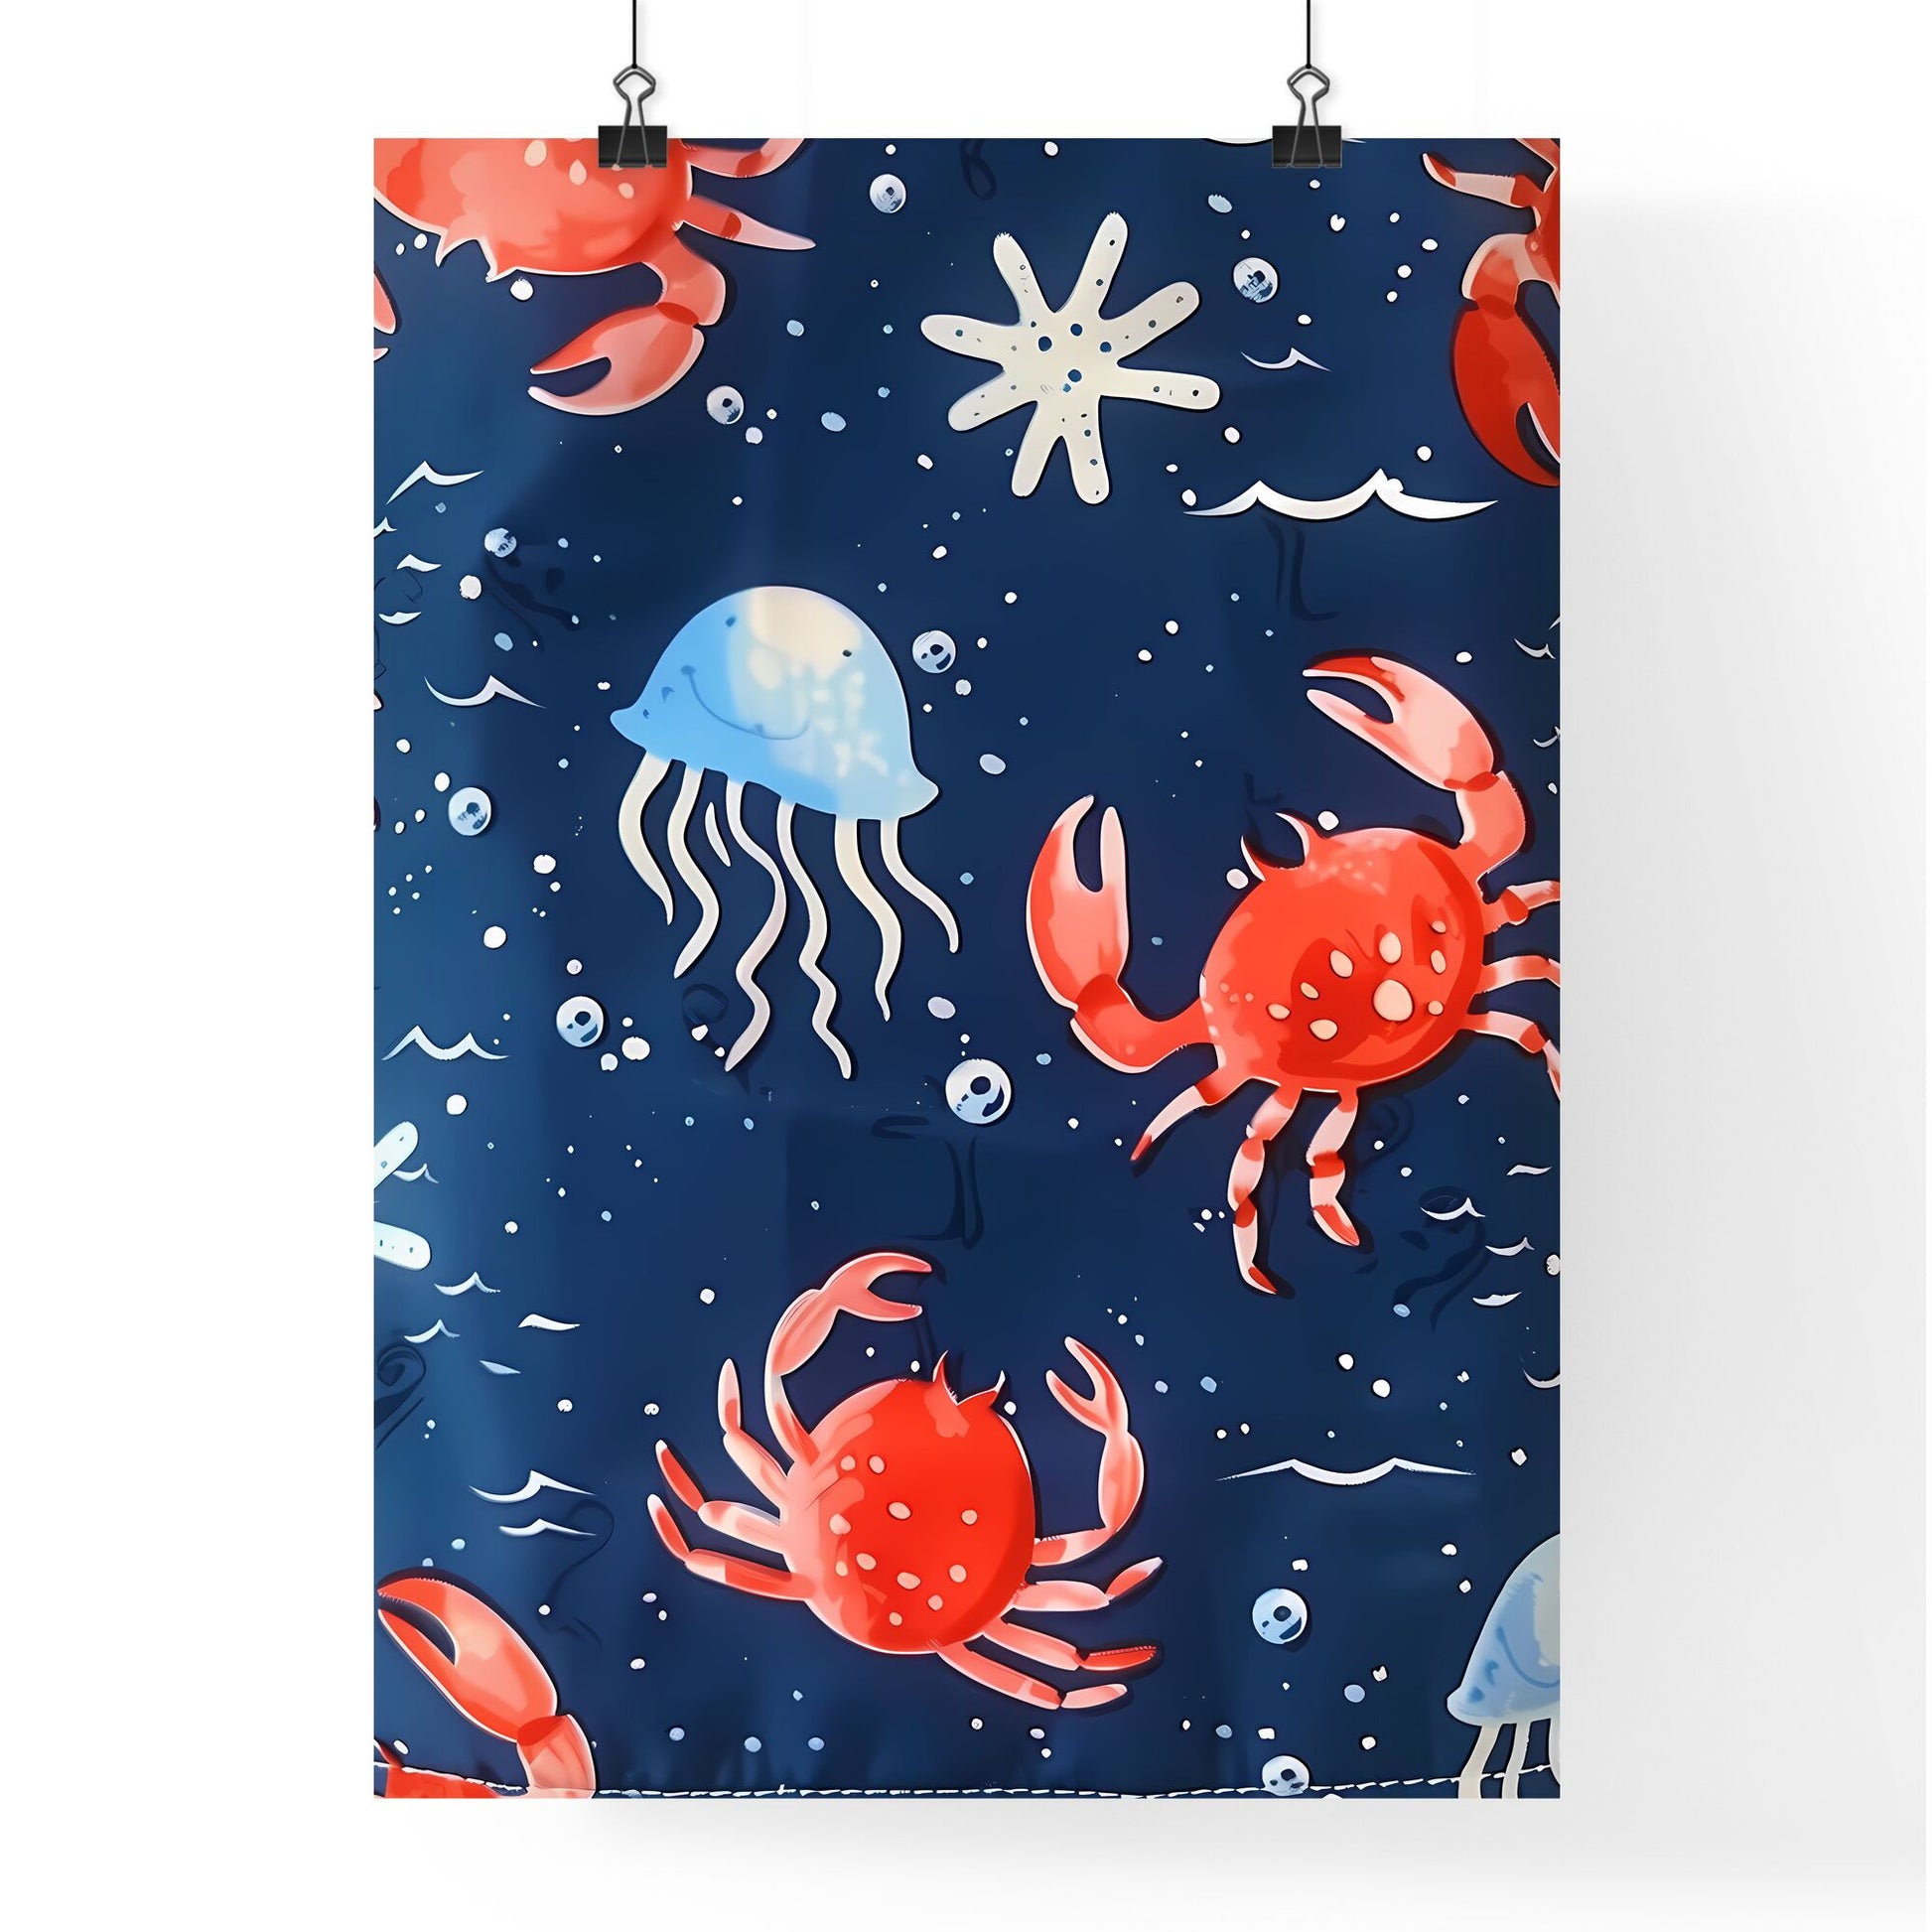 Vibrant Blue Fabric with Whimsical Sea Animals: Fish, Jellyfish, and Crabs Default Title